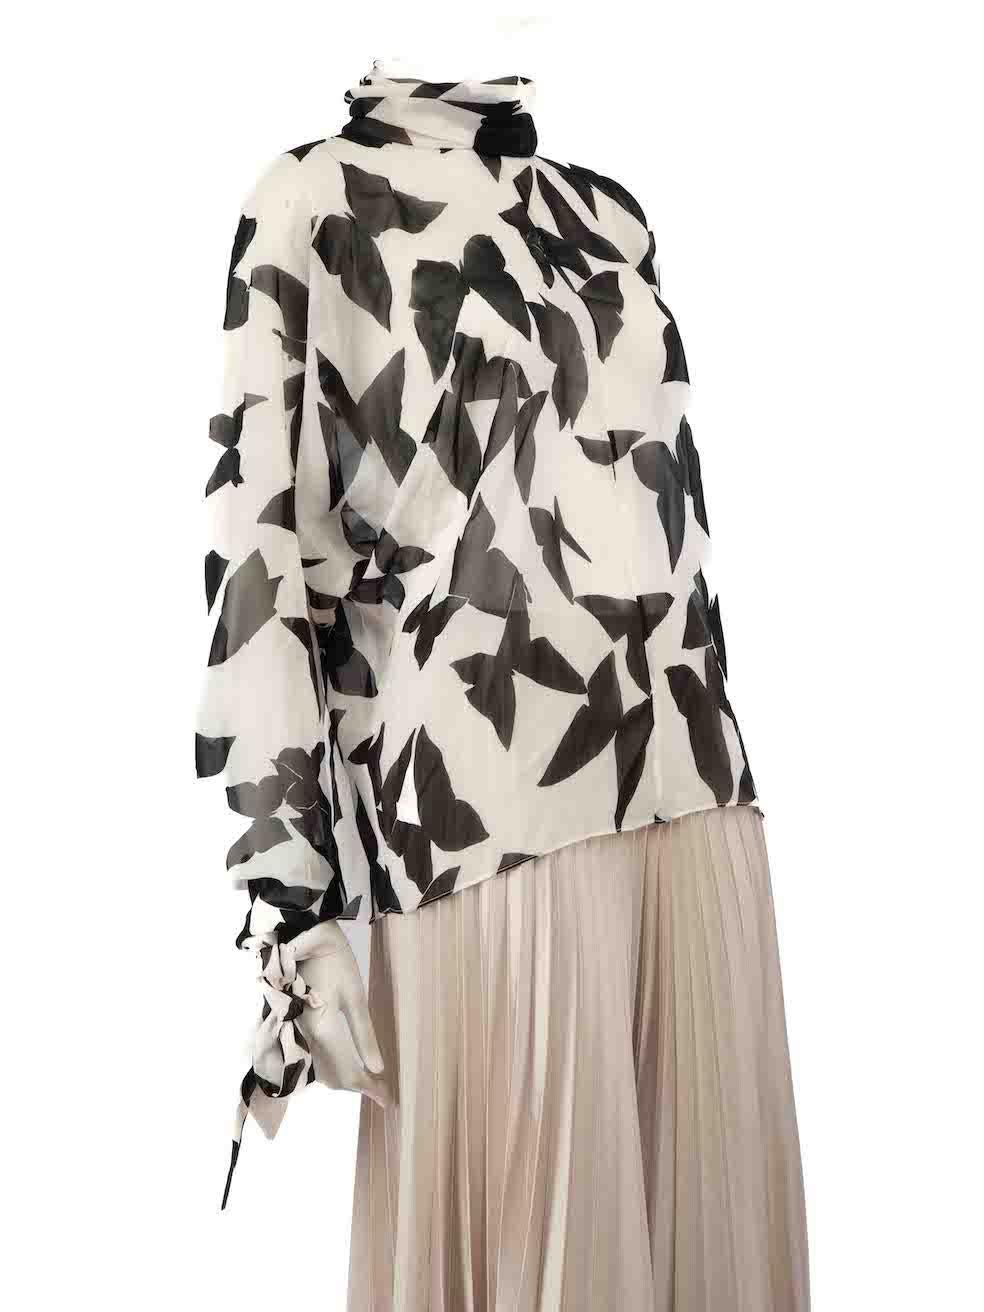 CONDITION is Very good. Hardly any visible wear to blouse is evident on this used Saint Laurent designer resale item.
 
 
 
 Details
 
 
 White
 
 Silk
 
 Blouse
 
 Black butterfly pattern
 
 Long sleeves
 
 Tie cuffs
 
 Sheer
 
 Mock neck
 
 Back